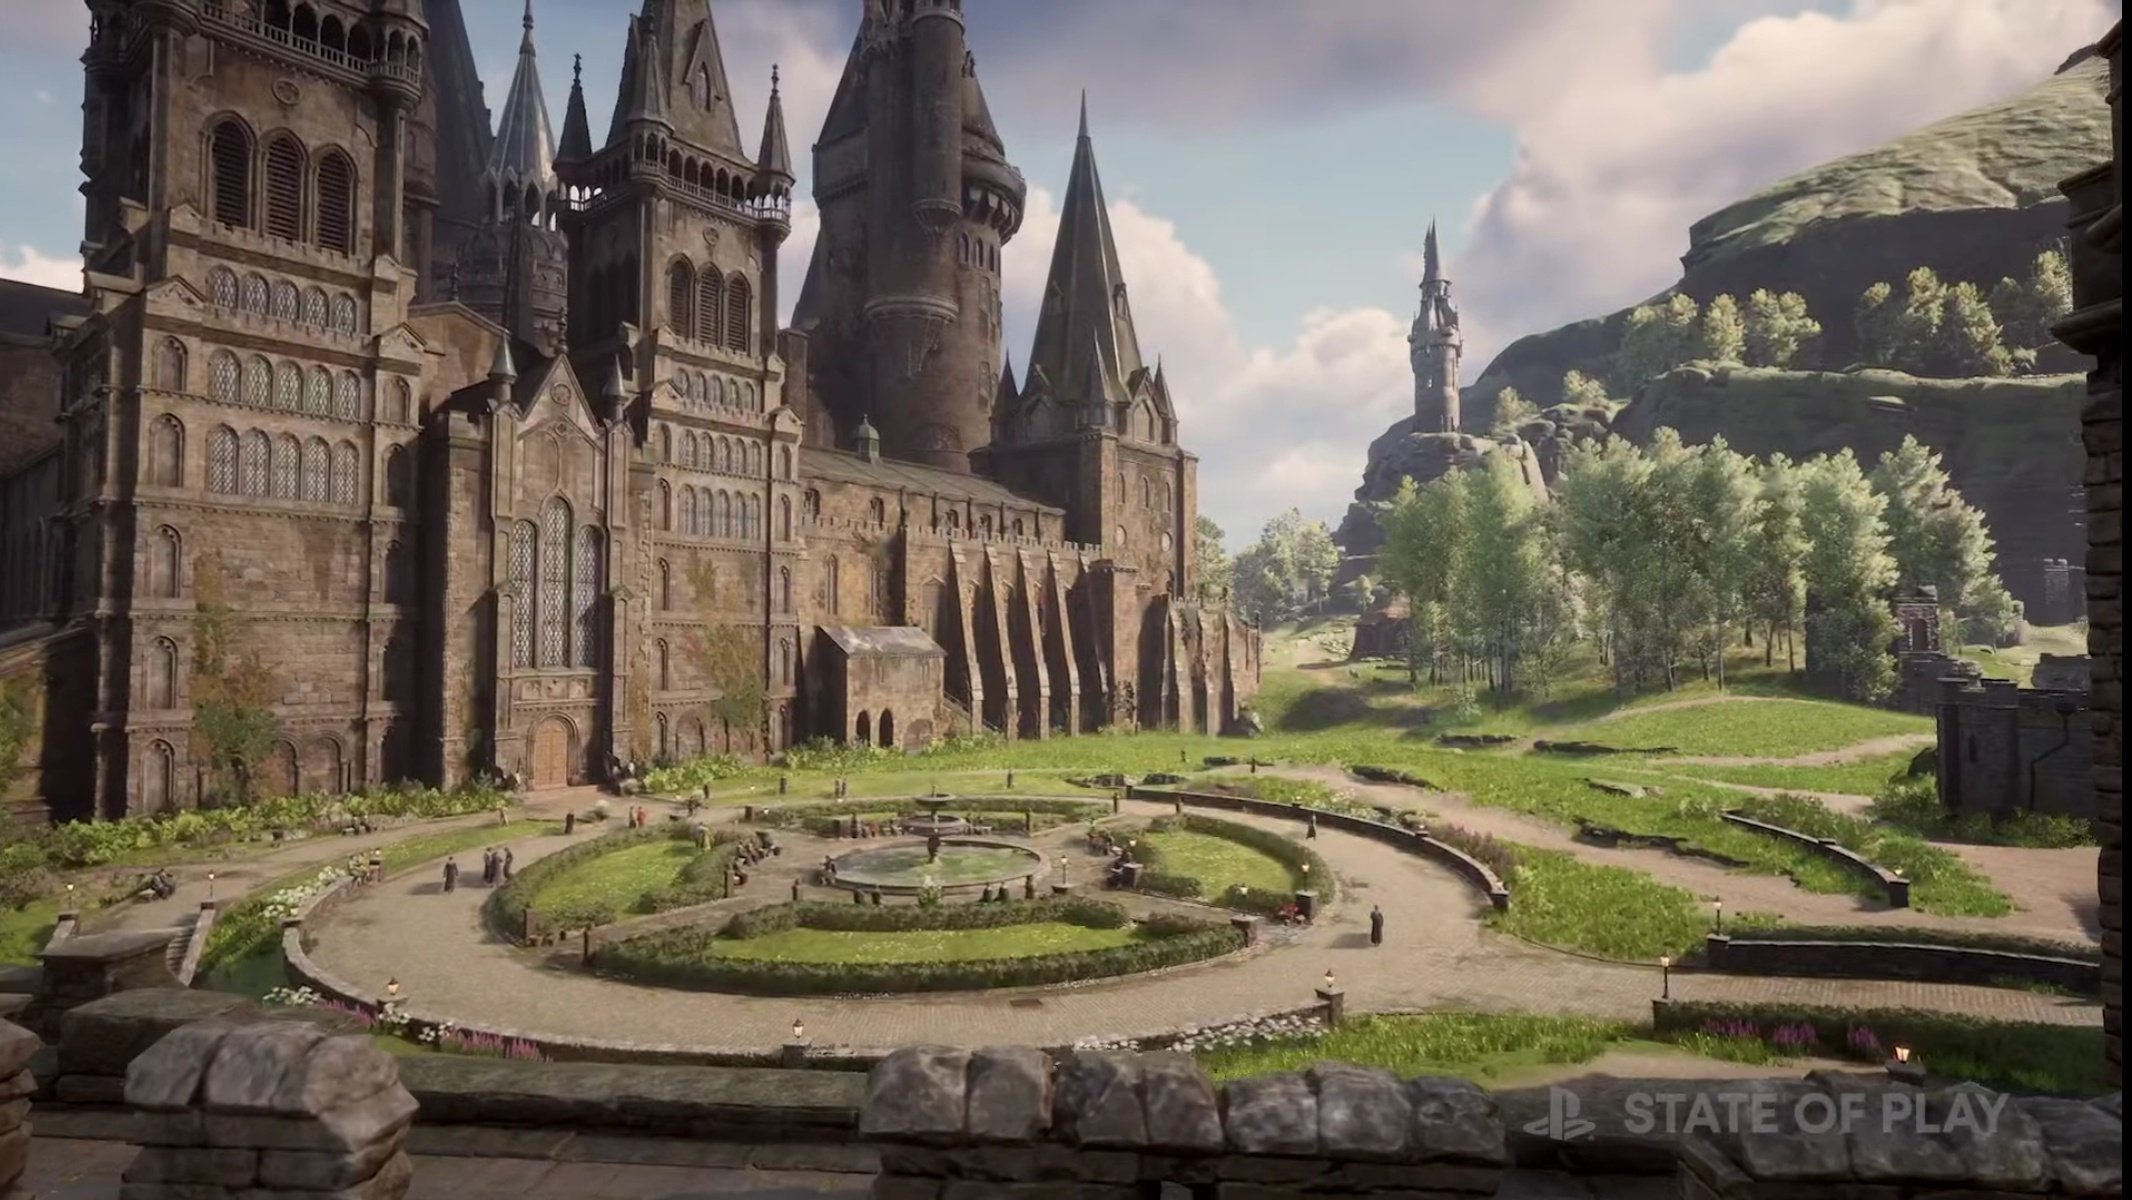 Hogwarts Legacy release date for PS4, Xbox One, and Nintendo